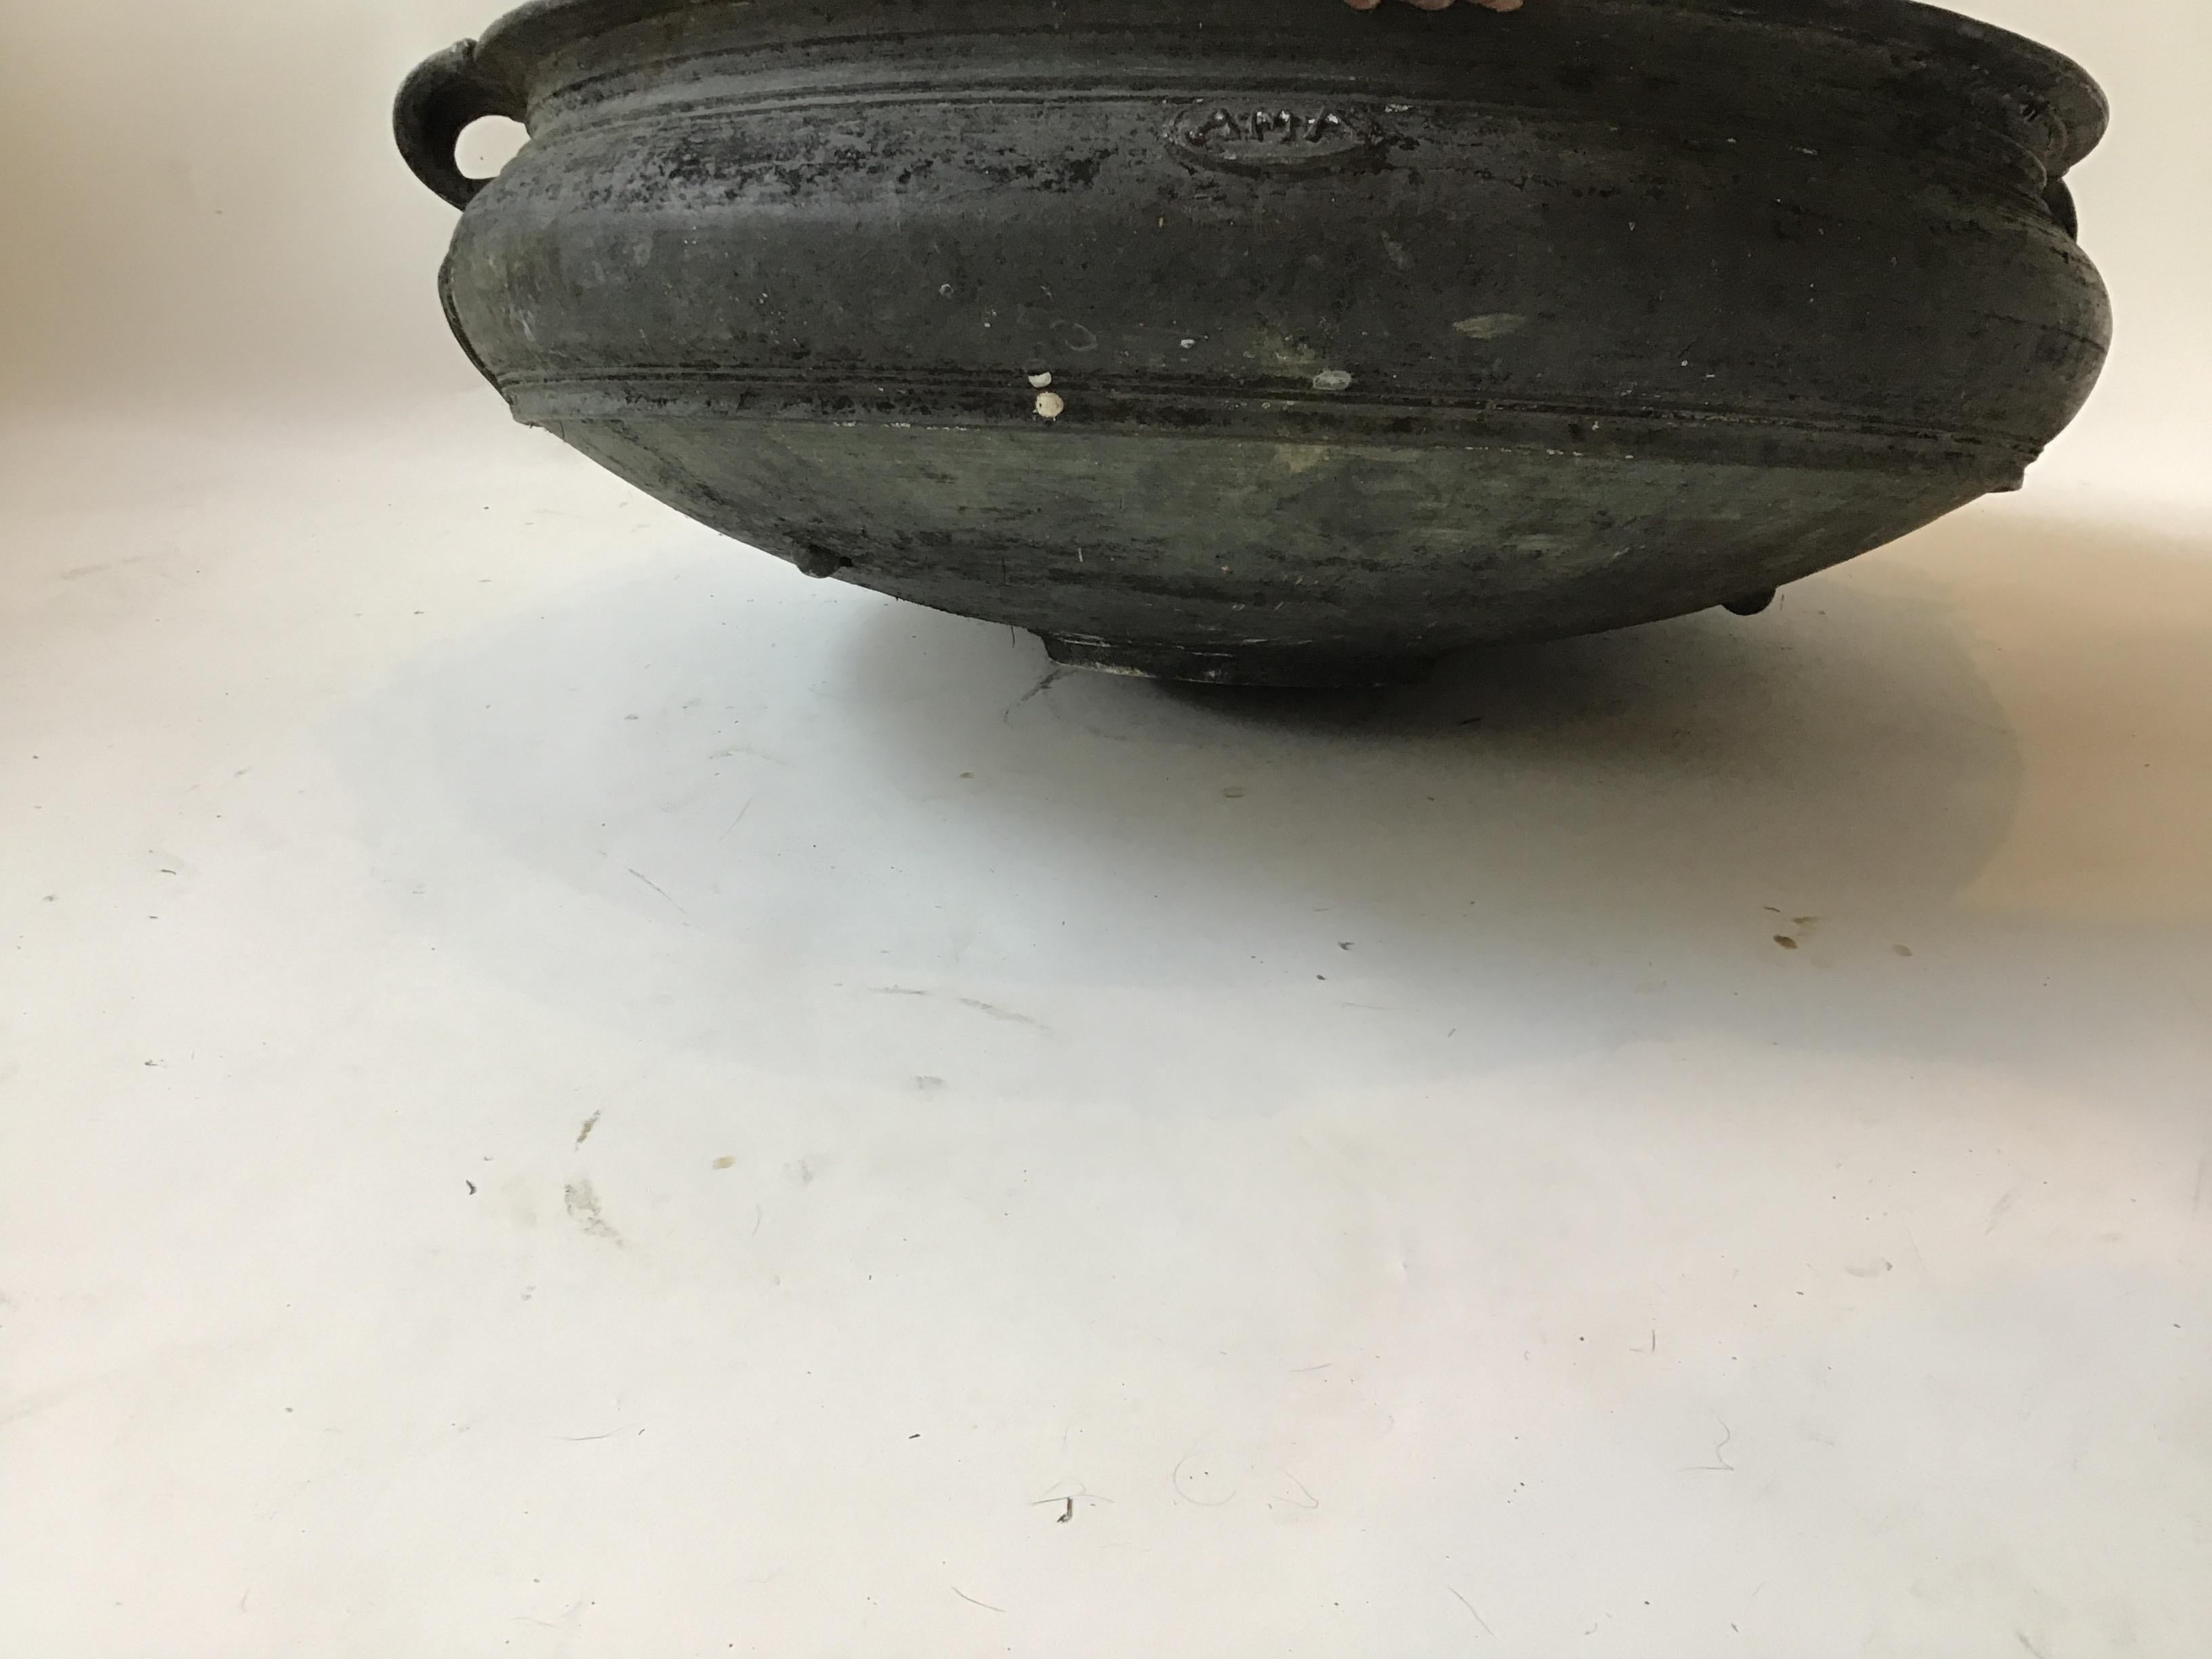 Large Asian Indian cast bronze Urli Temple bowl. This dish was used to serve food in temples. Great as a planter or the centerpiece of a table.